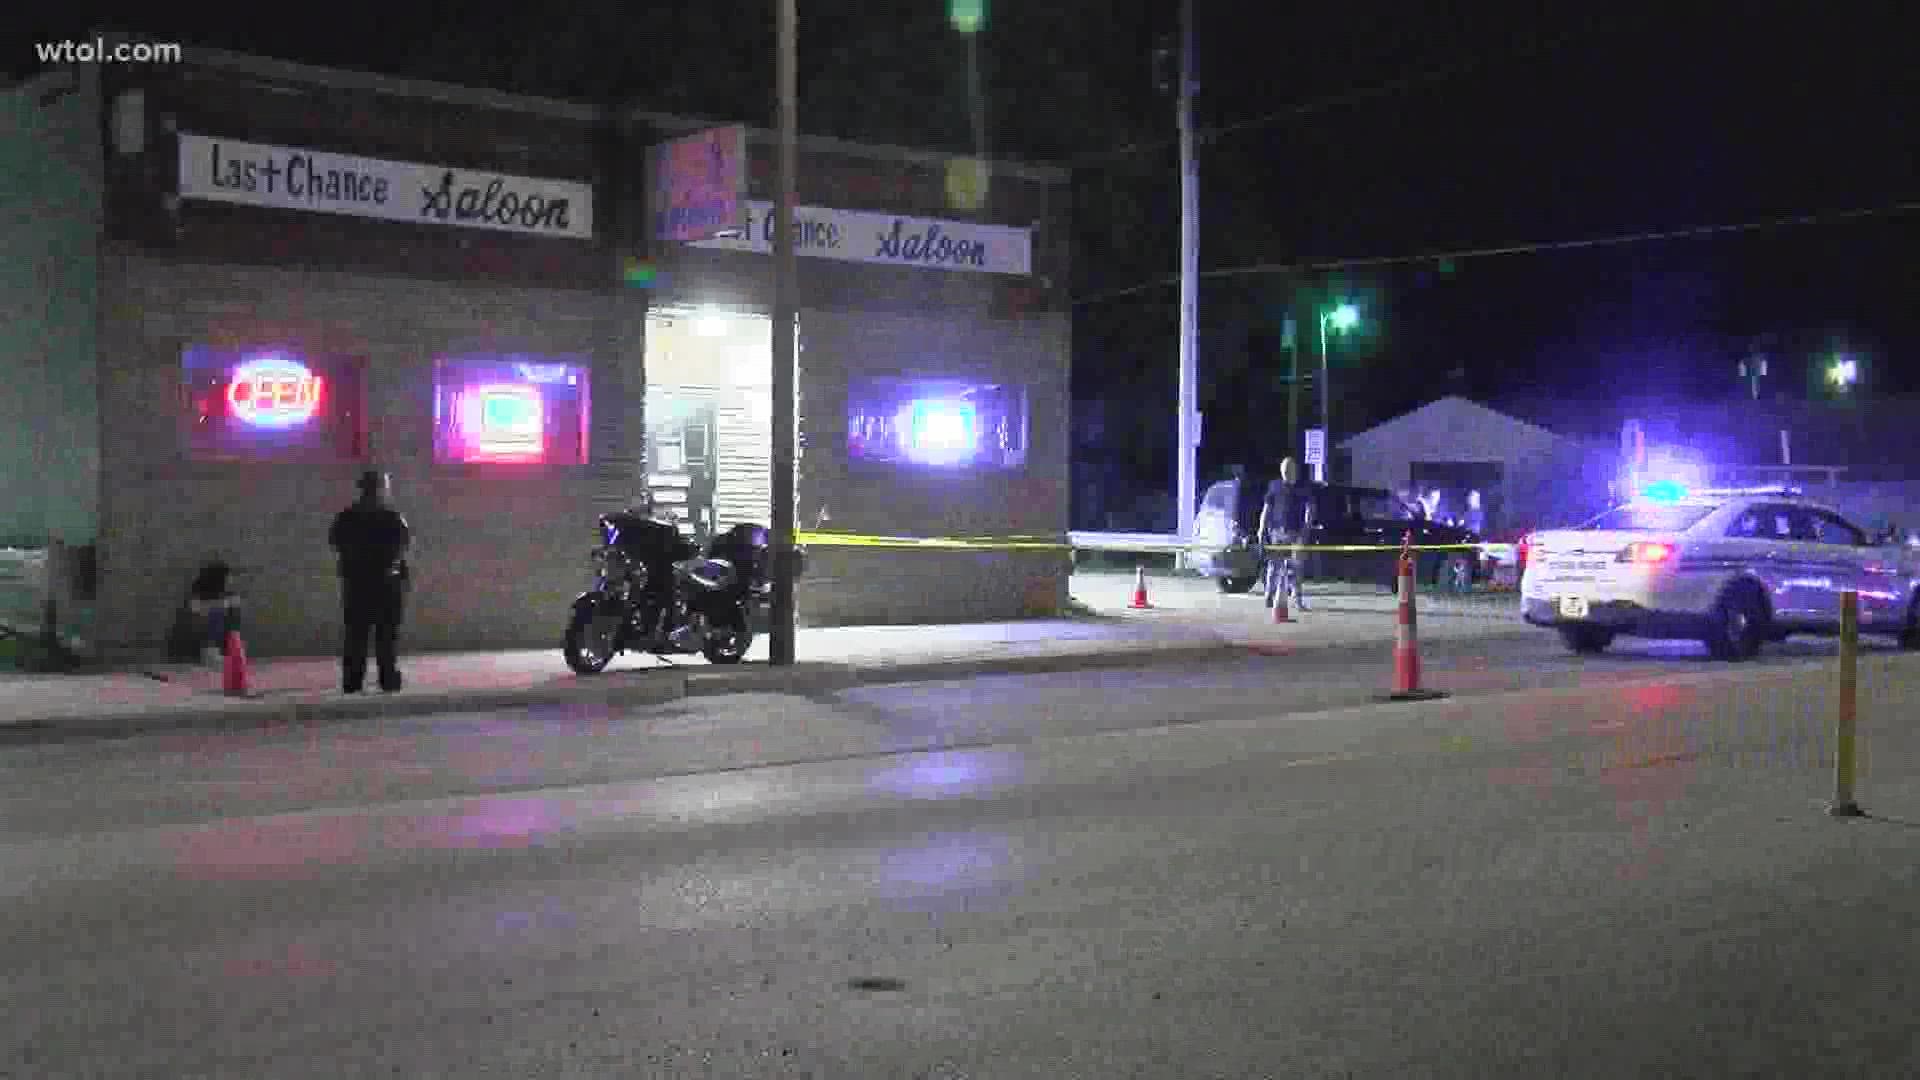 One suspect was arrested after the fatal shooting at the east Toledo bar early Tuesday morning.